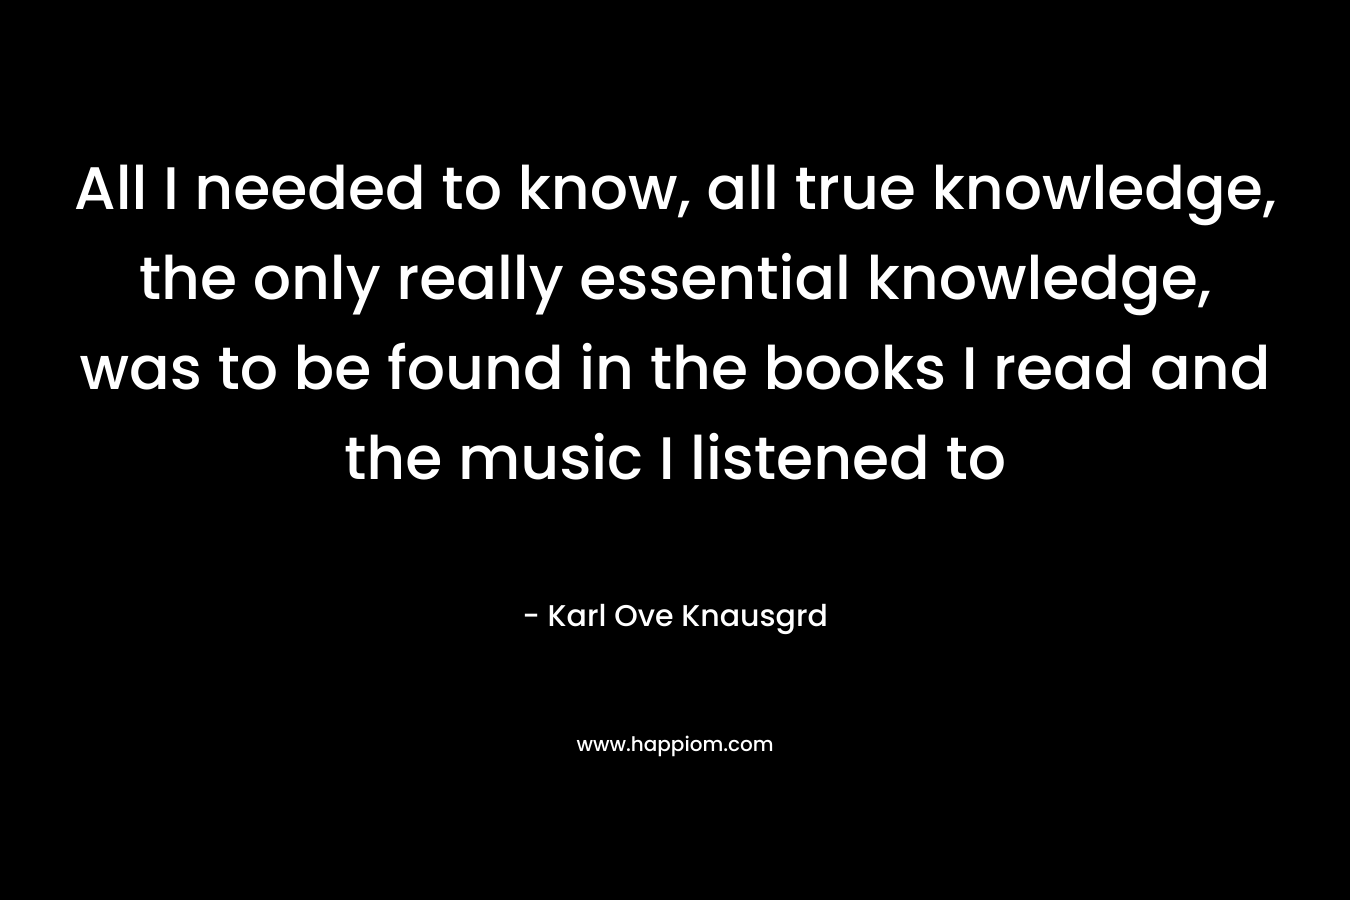 All I needed to know, all true knowledge, the only really essential knowledge, was to be found in the books I read and the music I listened to